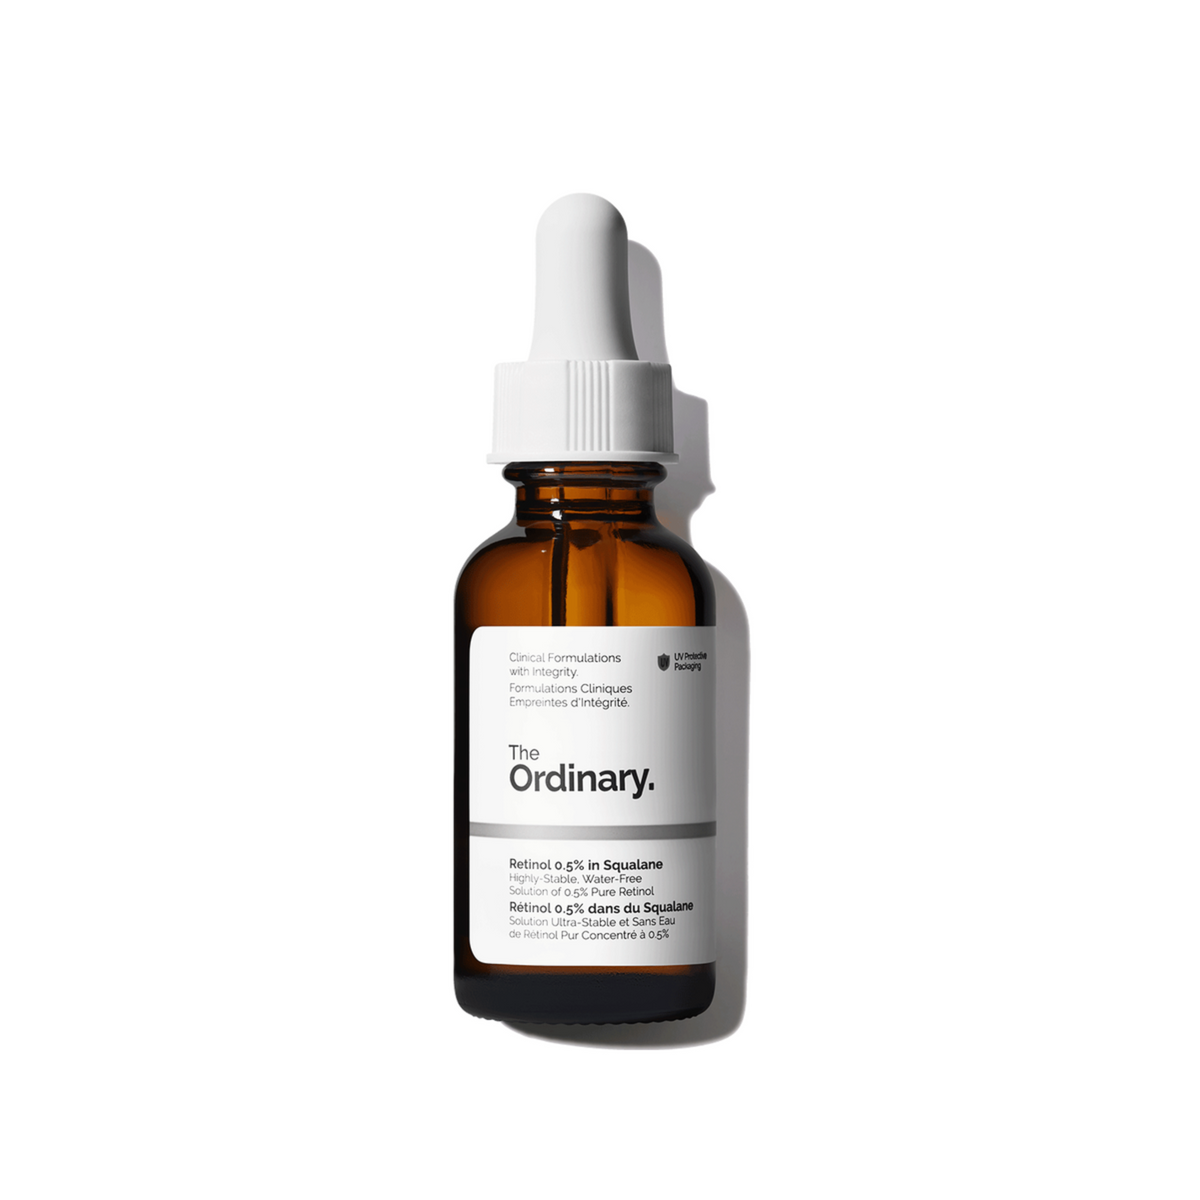 RETINOL 0,5% THE ORDINARY - Premium  from DION - Just DA 3500! Shop now at DION